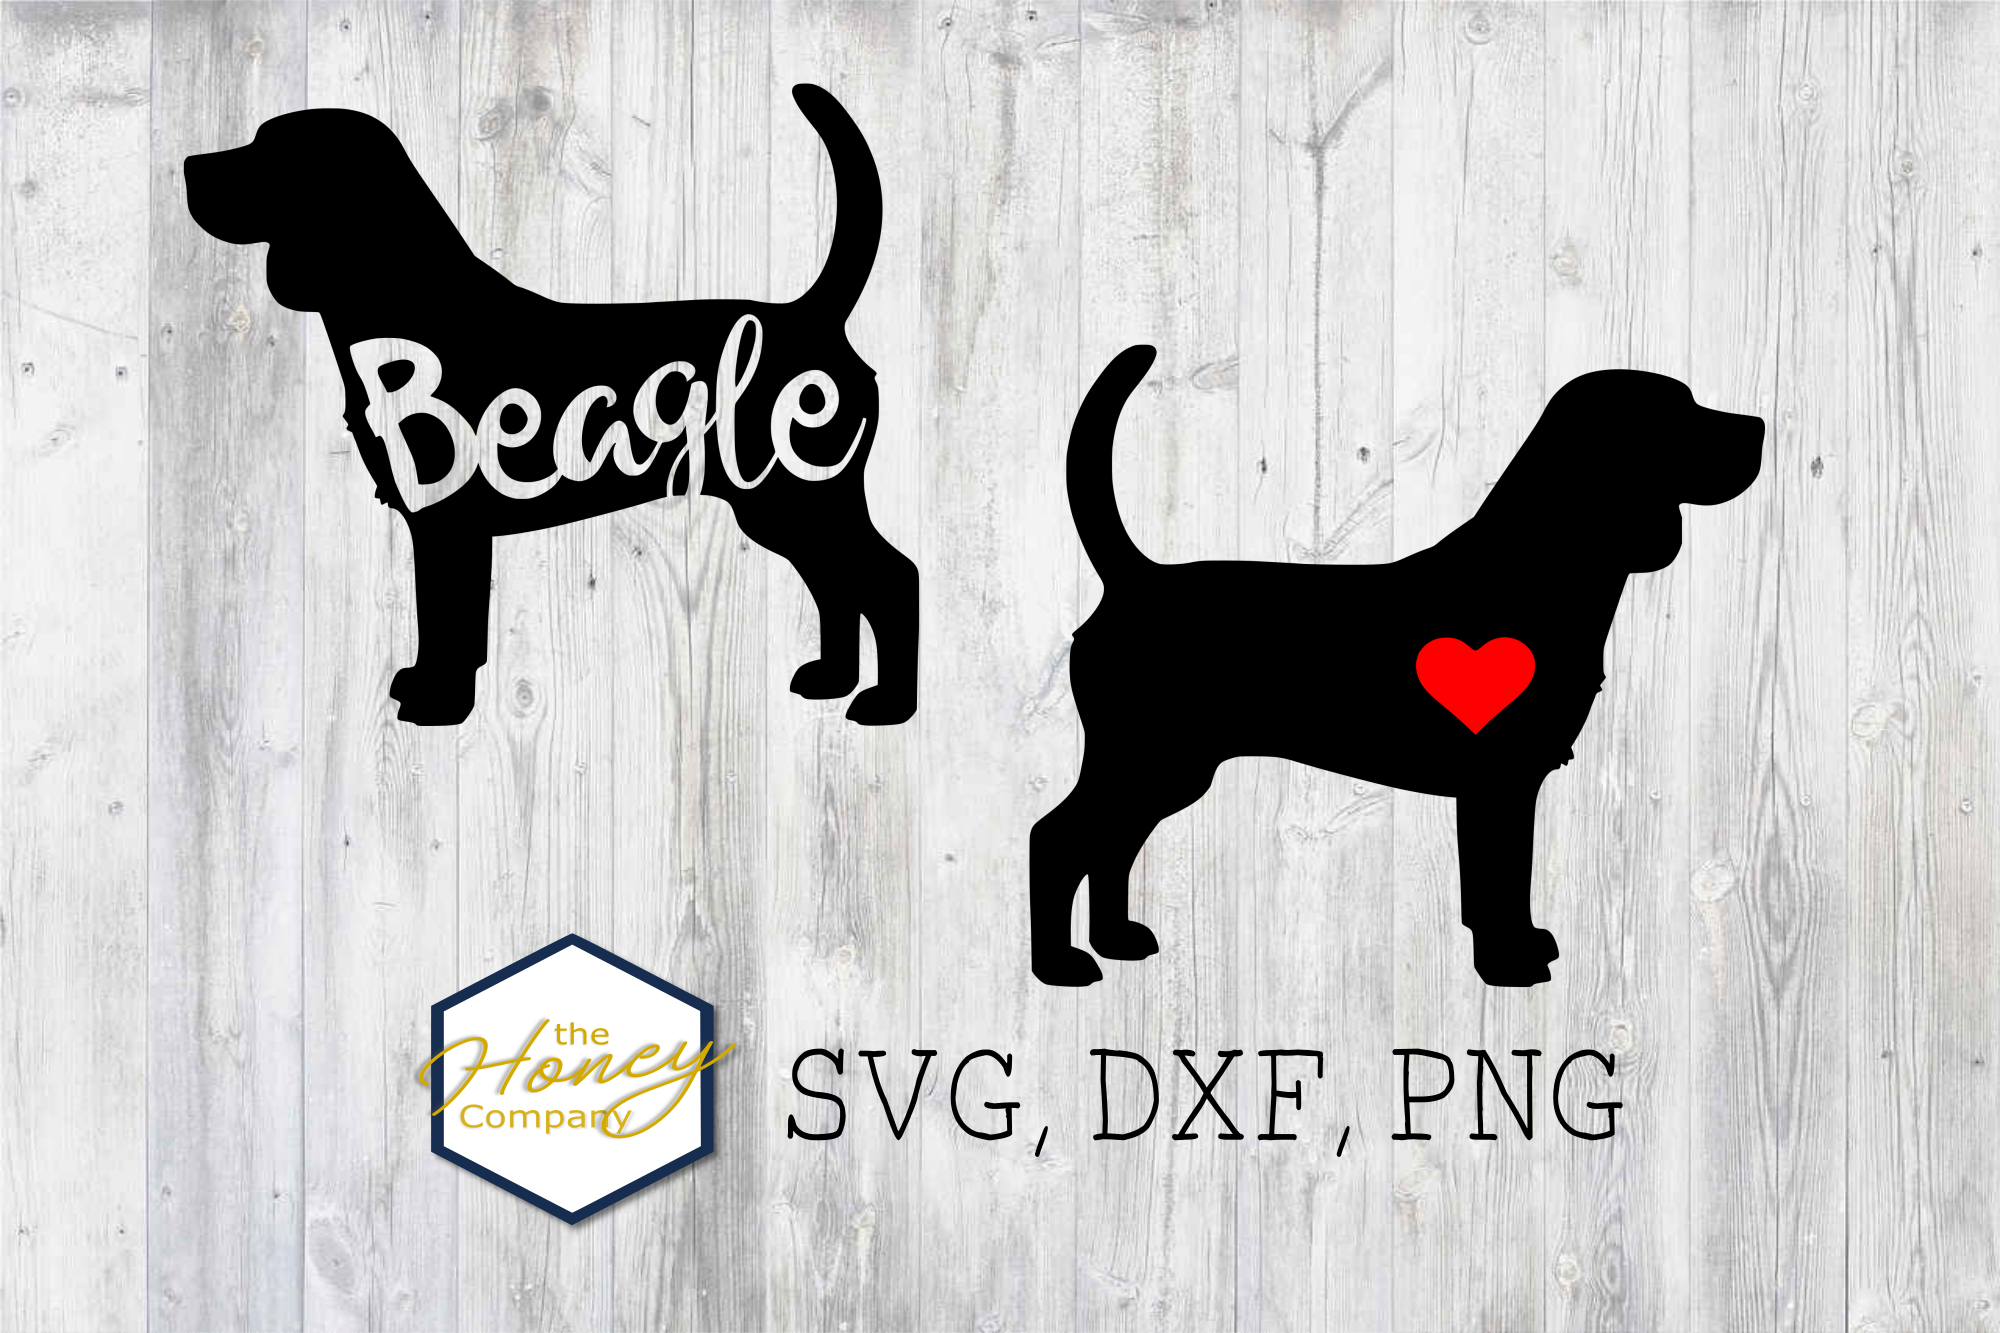 Download Beagle SVG PNG DXF Dog Breed Lover Cut File Clipart Decal